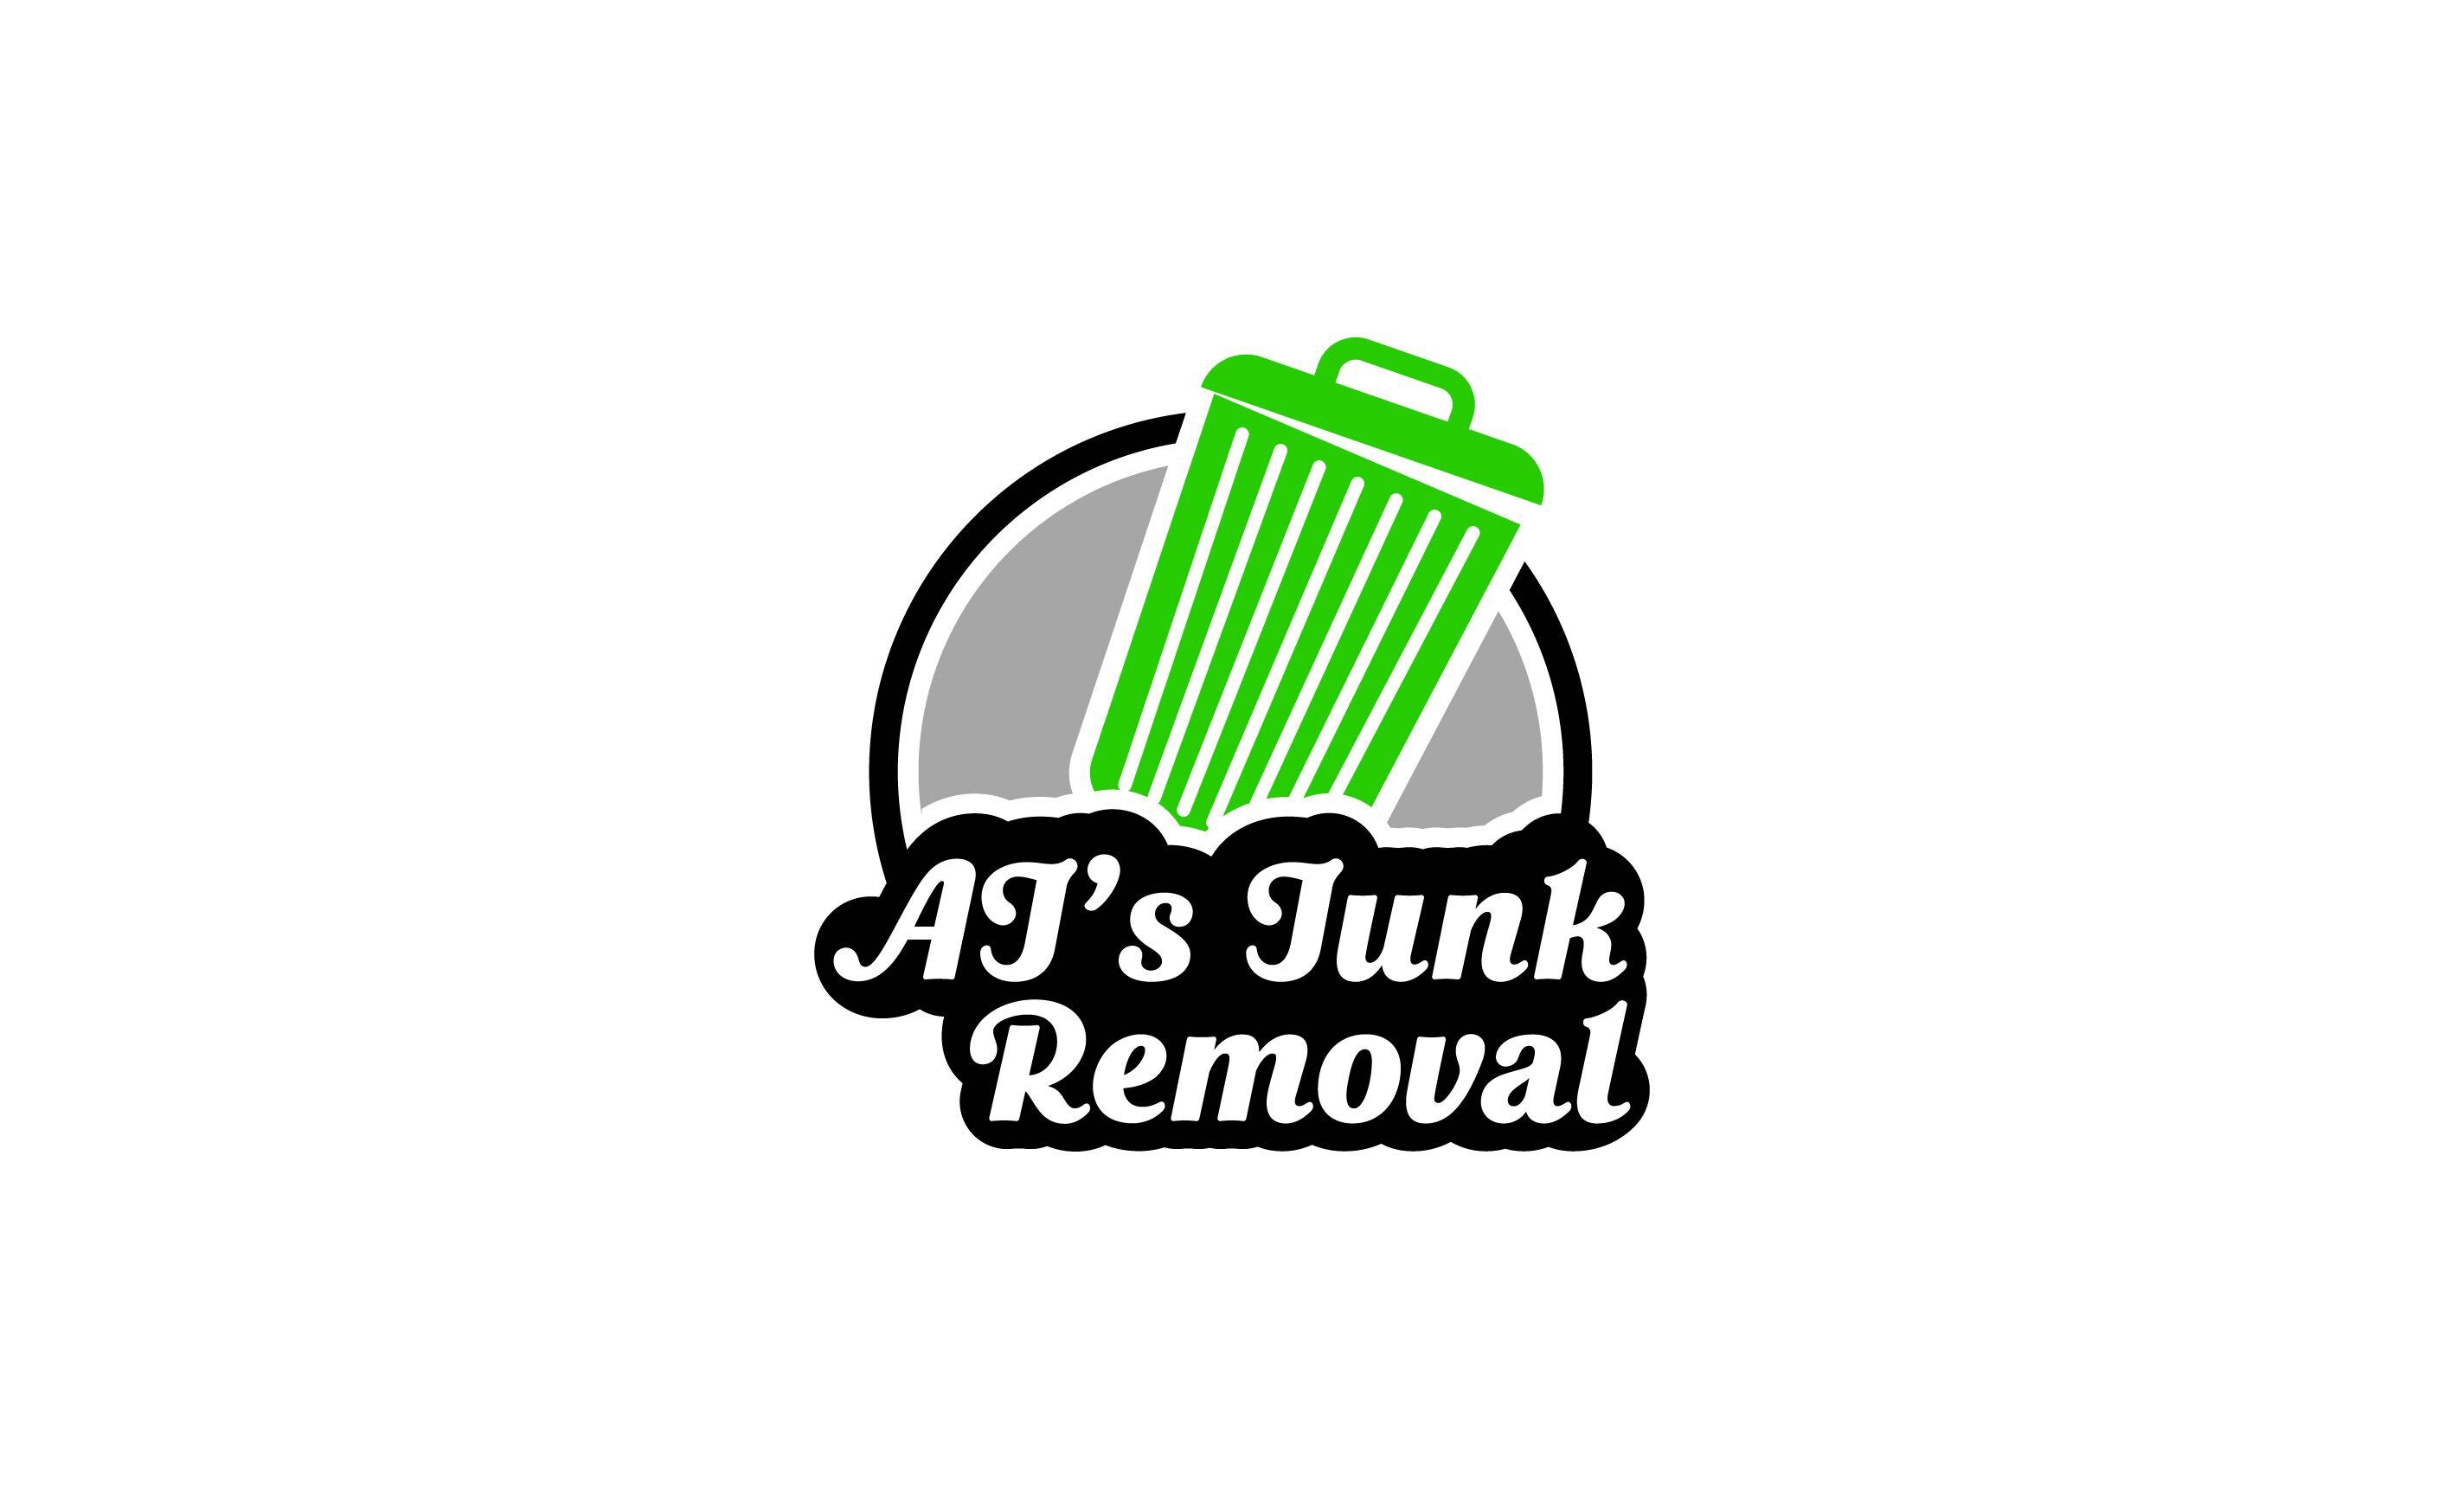 AJ's Junk Removal logo symbolizing professional commercial junk clearing services in Fairfield County, Connecticut.